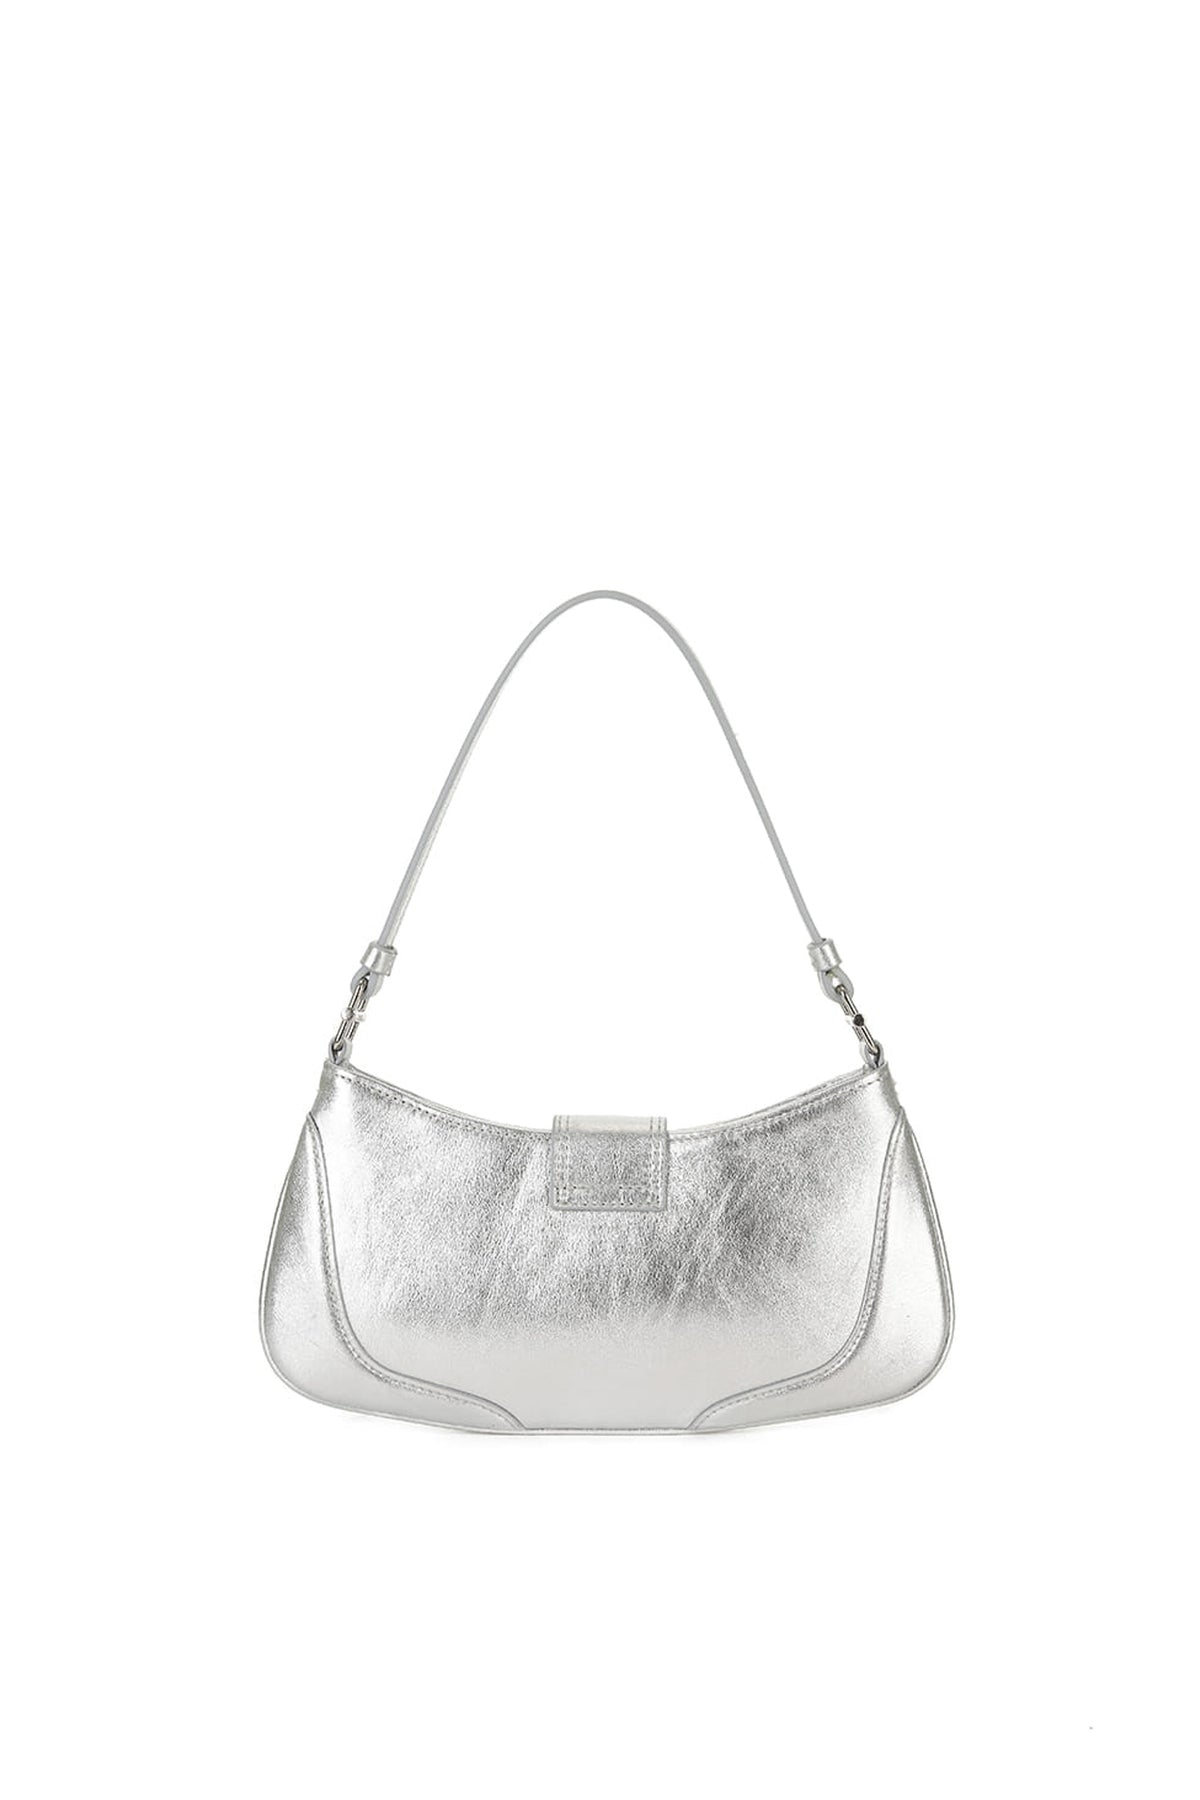 SHOULDER BROCLE SMALL / SILVER